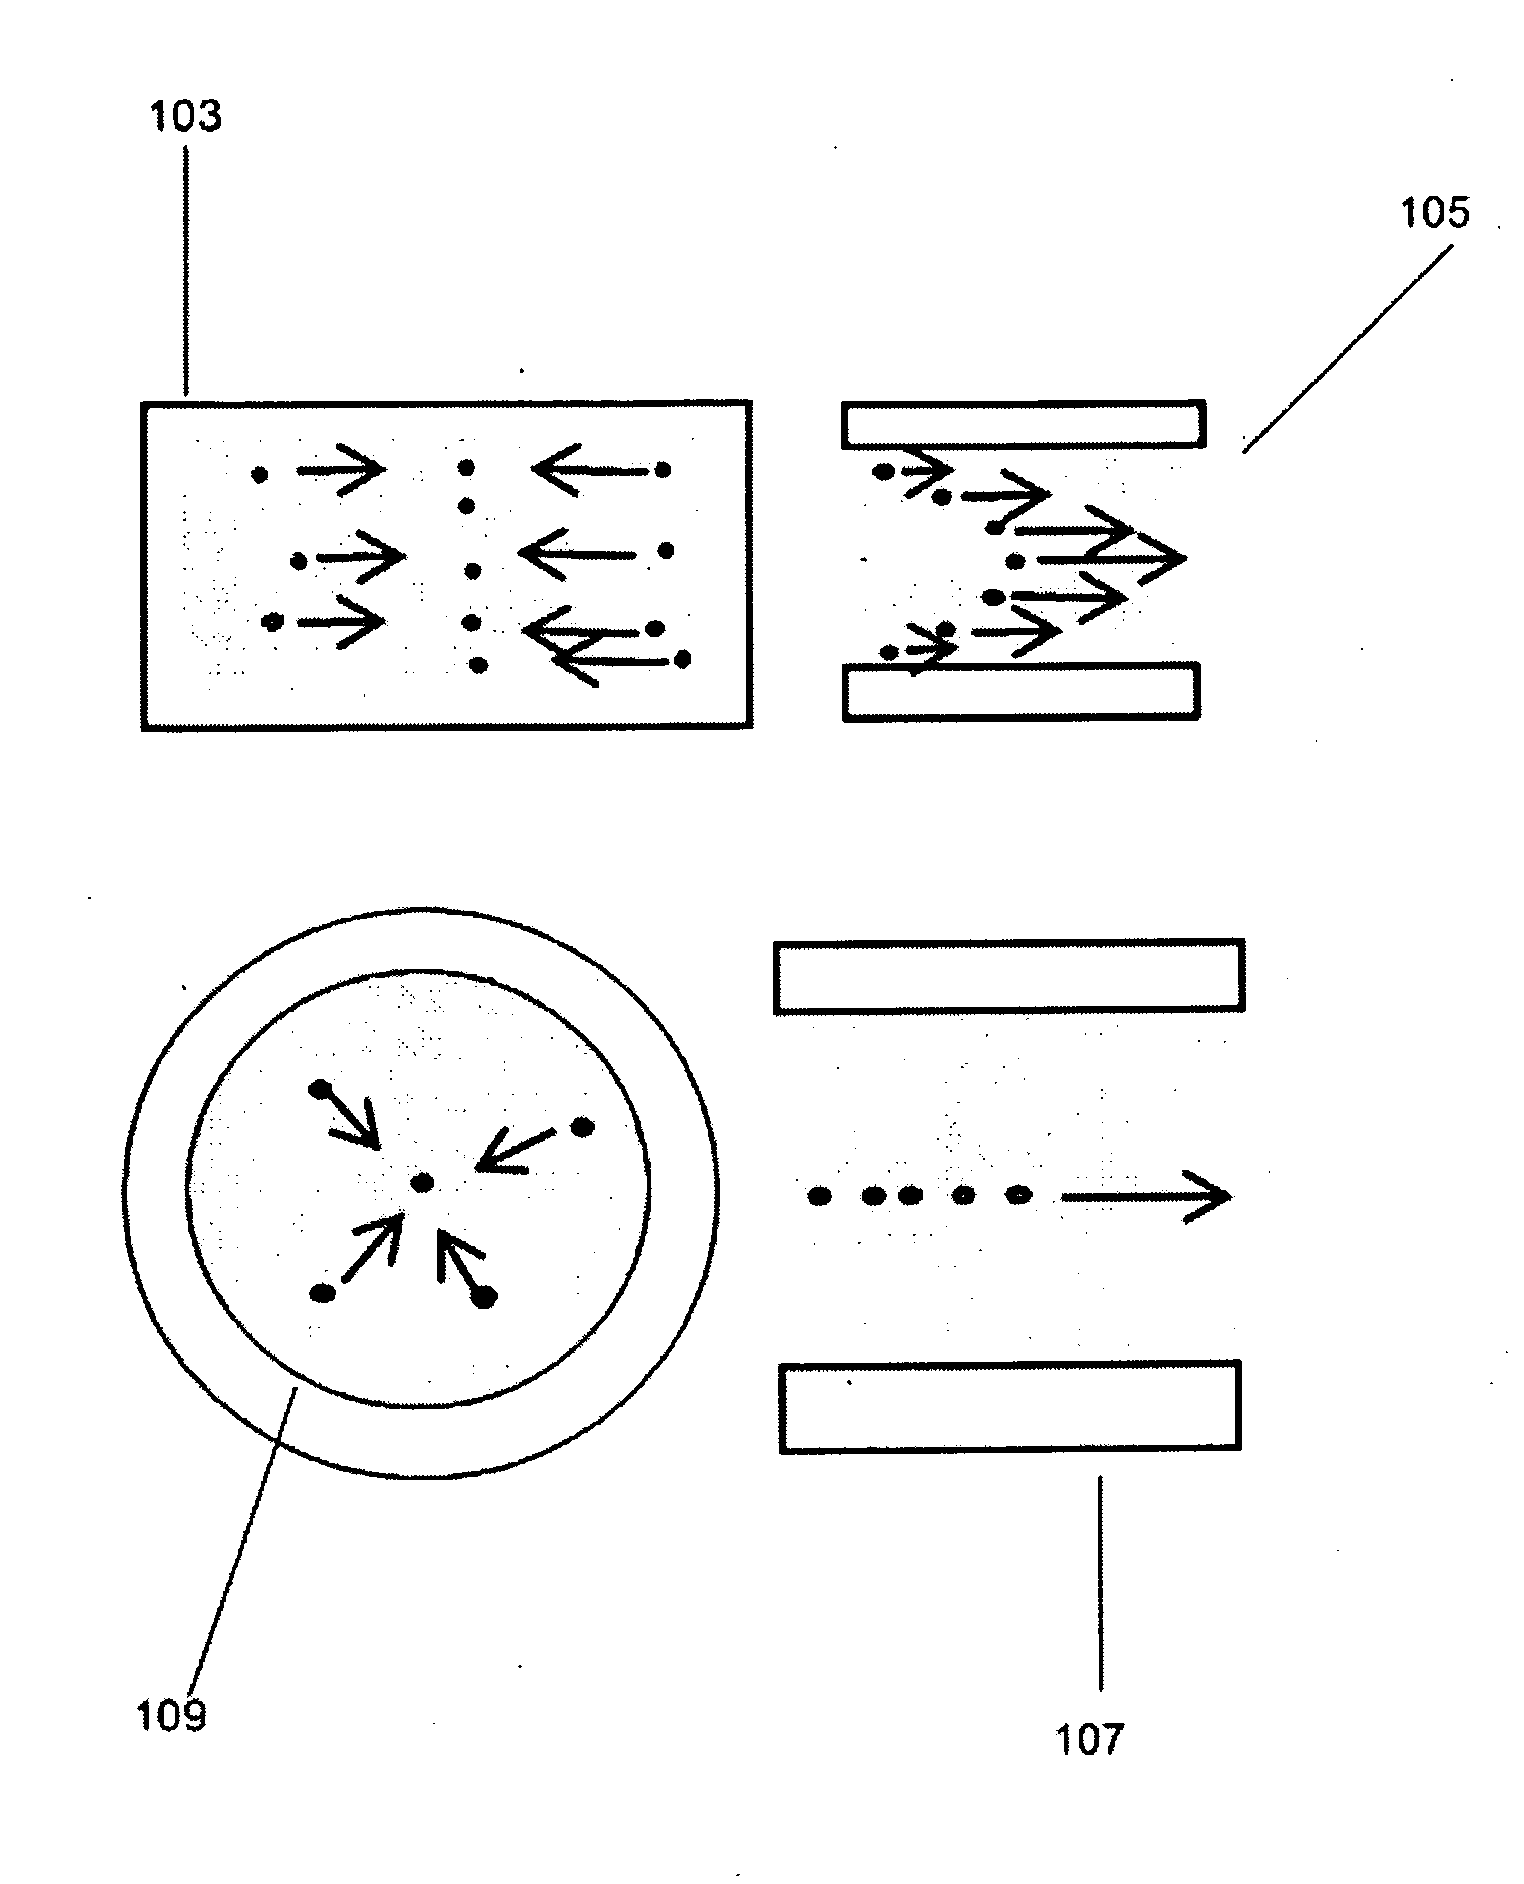 Particle Analyzing Systems and Methods Using Acoustic Radiation Pressure